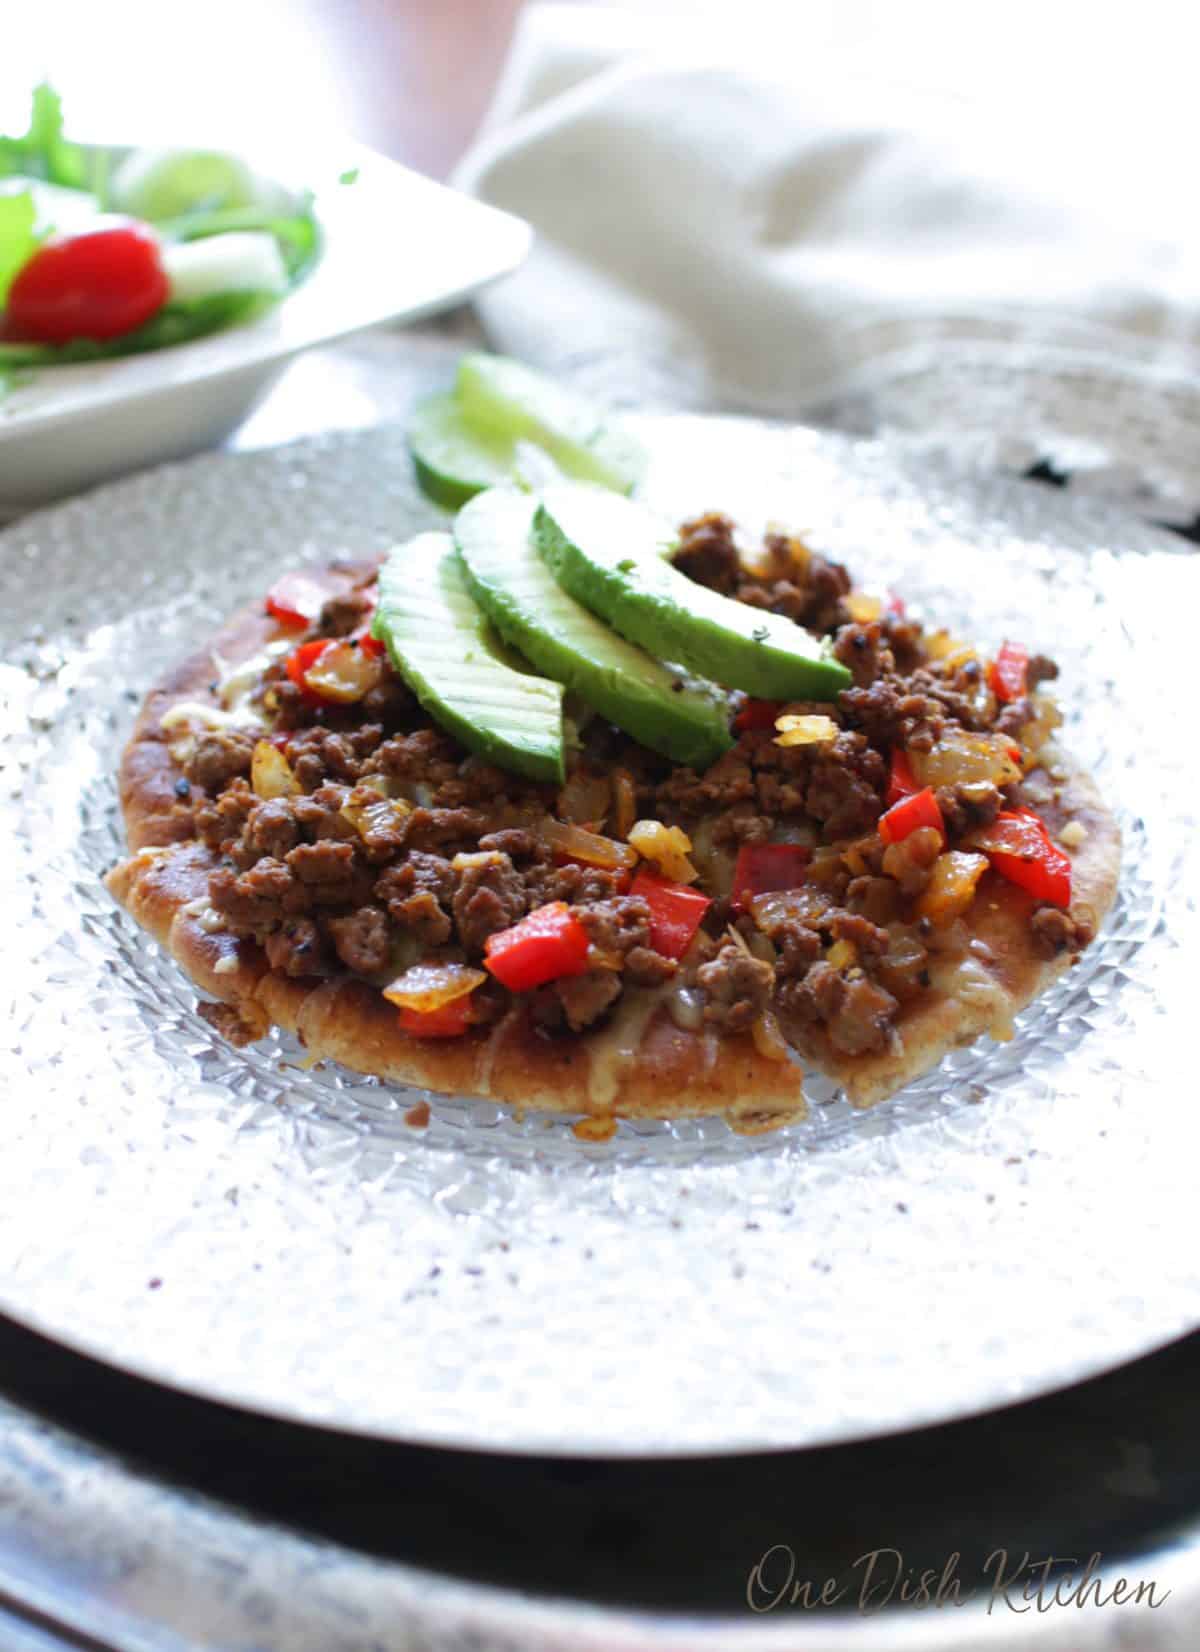 A pizza made on pita bread made with ground beef and topped red peppers, cheese, onions, and three avocado slices.